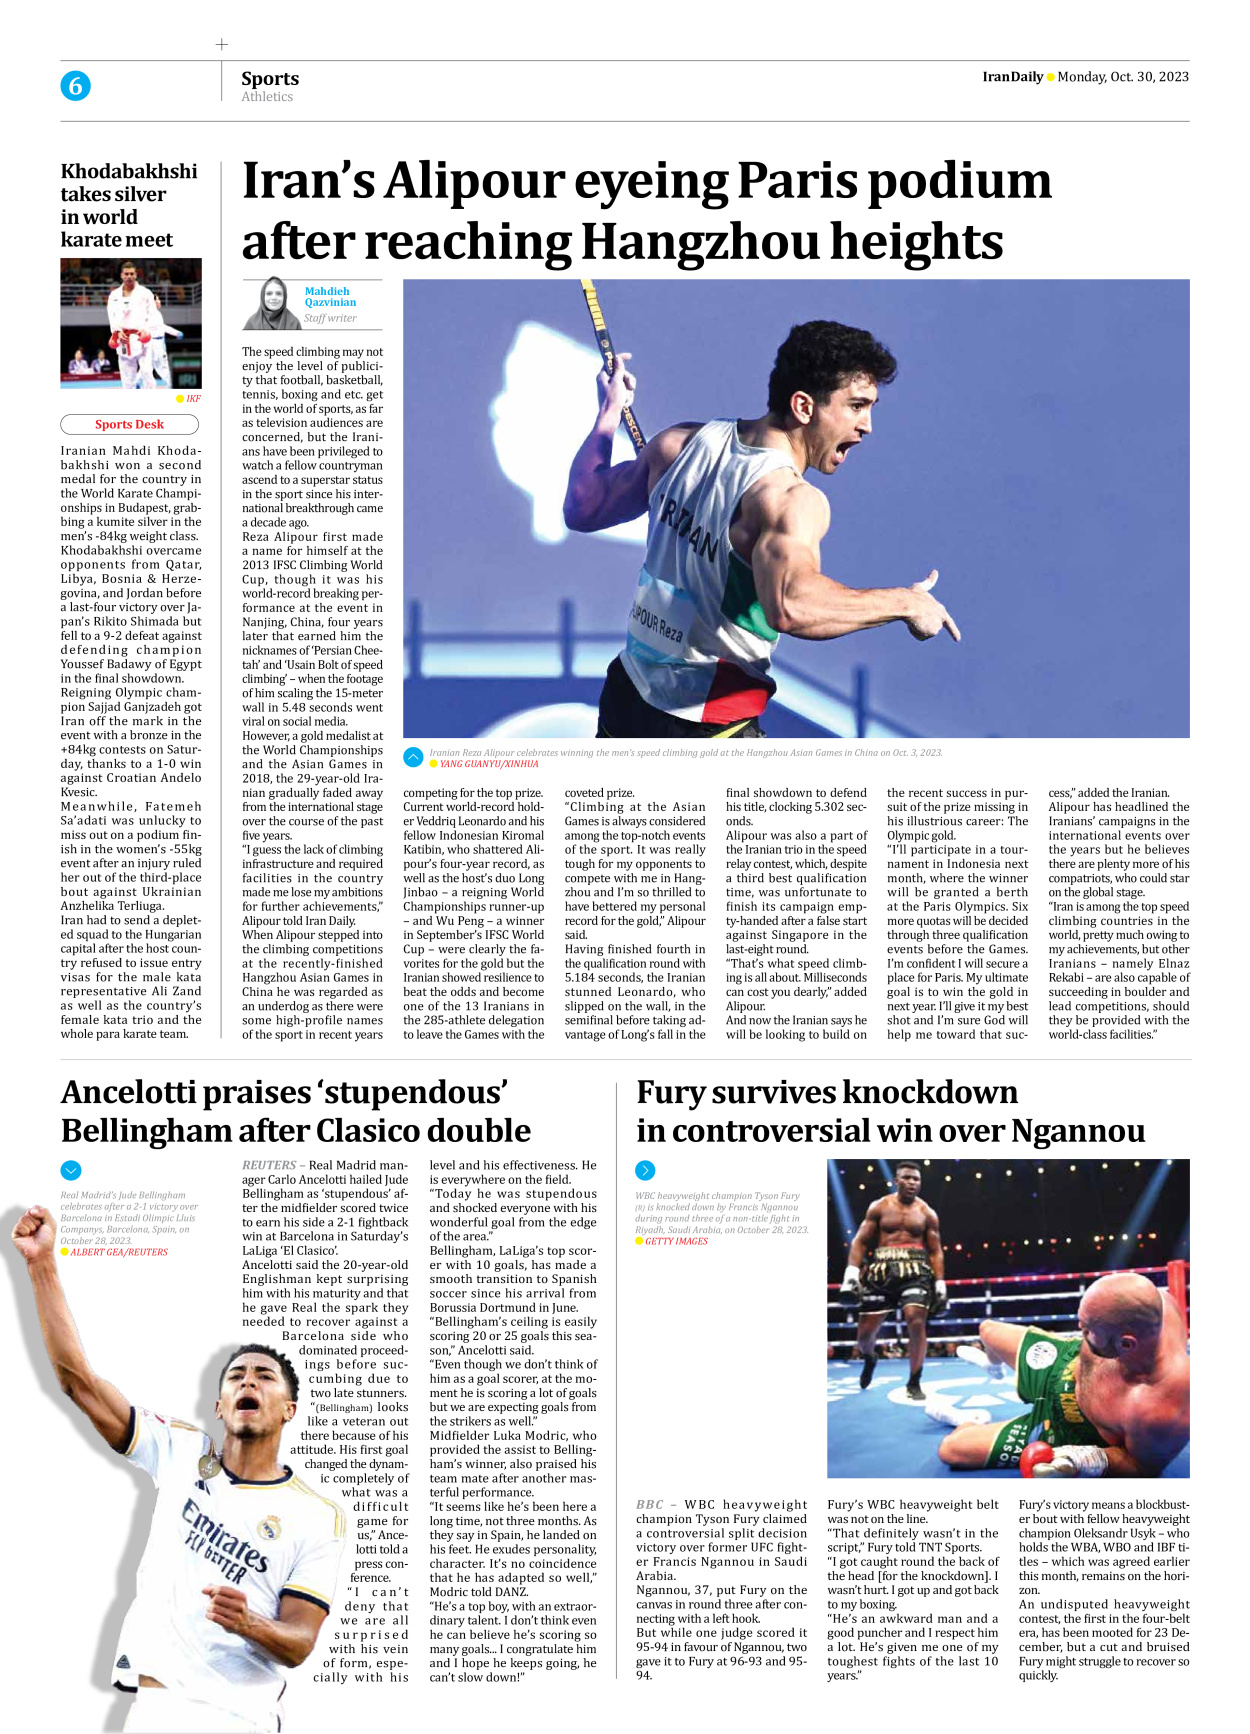 Iran Daily - Number Seven Thousand Four Hundred and Twenty One - 30 October 2023 - Page 6